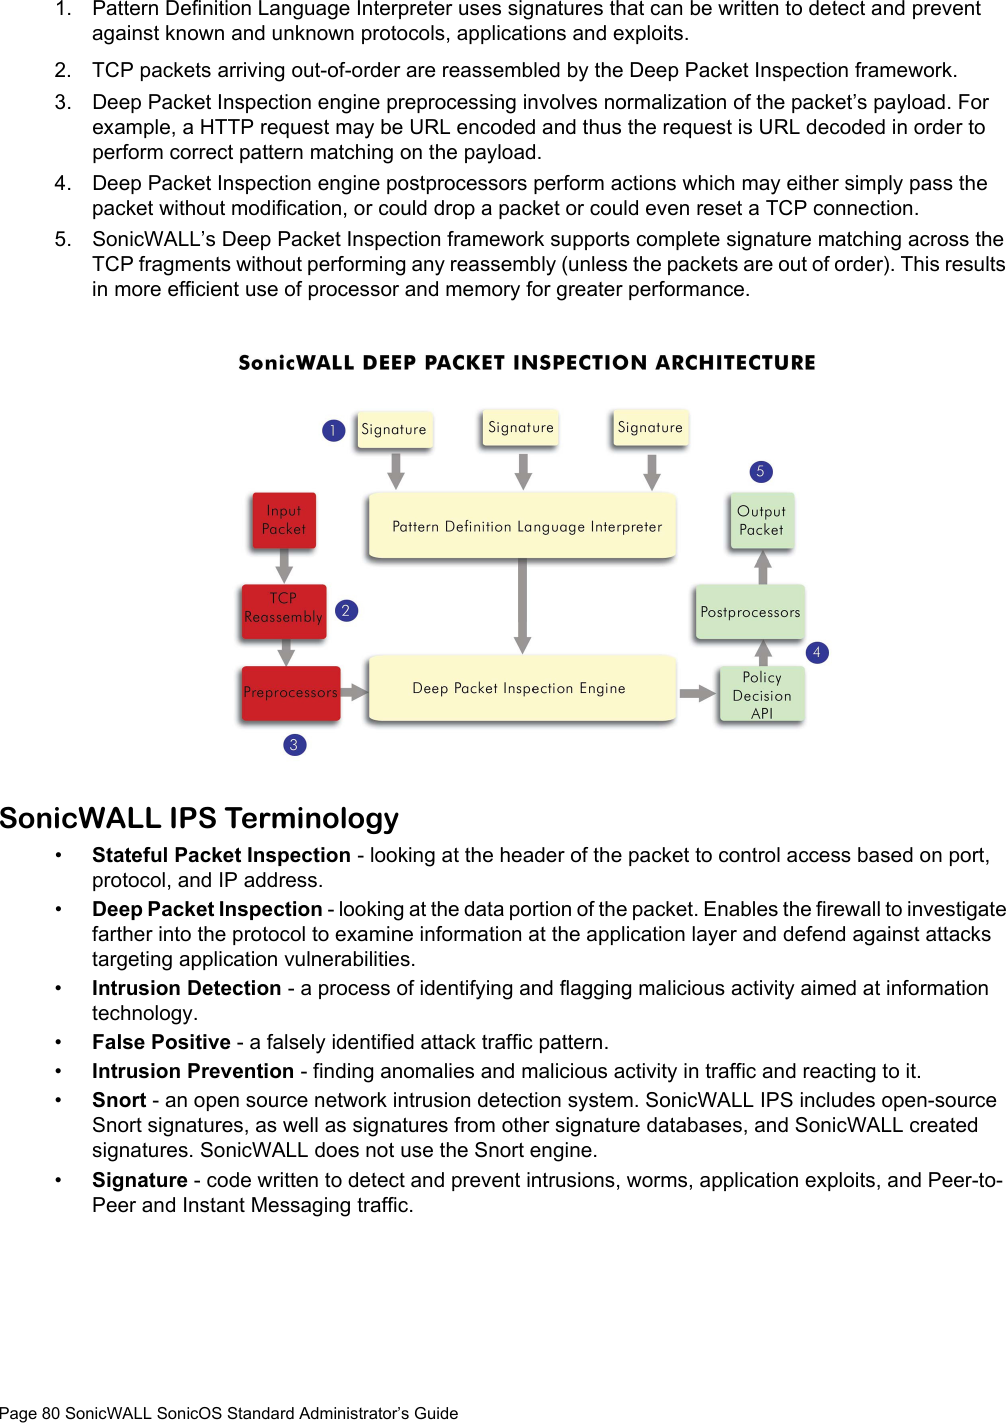 Page 80 SonicWALL SonicOS Standard Administrator’s Guide1. Pattern Definition Language Interpreter uses signatures that can be written to detect and prevent against known and unknown protocols, applications and exploits. 2. TCP packets arriving out-of-order are reassembled by the Deep Packet Inspection framework. 3. Deep Packet Inspection engine preprocessing involves normalization of the packet’s payload. For example, a HTTP request may be URL encoded and thus the request is URL decoded in order to perform correct pattern matching on the payload.4. Deep Packet Inspection engine postprocessors perform actions which may either simply pass the packet without modification, or could drop a packet or could even reset a TCP connection. 5. SonicWALL’s Deep Packet Inspection framework supports complete signature matching across the TCP fragments without performing any reassembly (unless the packets are out of order). This results in more efficient use of processor and memory for greater performance.SonicWALL IPS Terminology•Stateful Packet Inspection - looking at the header of the packet to control access based on port, protocol, and IP address.•Deep Packet Inspection - looking at the data portion of the packet. Enables the firewall to investigate farther into the protocol to examine information at the application layer and defend against attacks targeting application vulnerabilities.•Intrusion Detection - a process of identifying and flagging malicious activity aimed at information technology.•False Positive - a falsely identified attack traffic pattern.•Intrusion Prevention - finding anomalies and malicious activity in traffic and reacting to it.•Snort - an open source network intrusion detection system. SonicWALL IPS includes open-source Snort signatures, as well as signatures from other signature databases, and SonicWALL created signatures. SonicWALL does not use the Snort engine.•Signature - code written to detect and prevent intrusions, worms, application exploits, and Peer-to-Peer and Instant Messaging traffic.